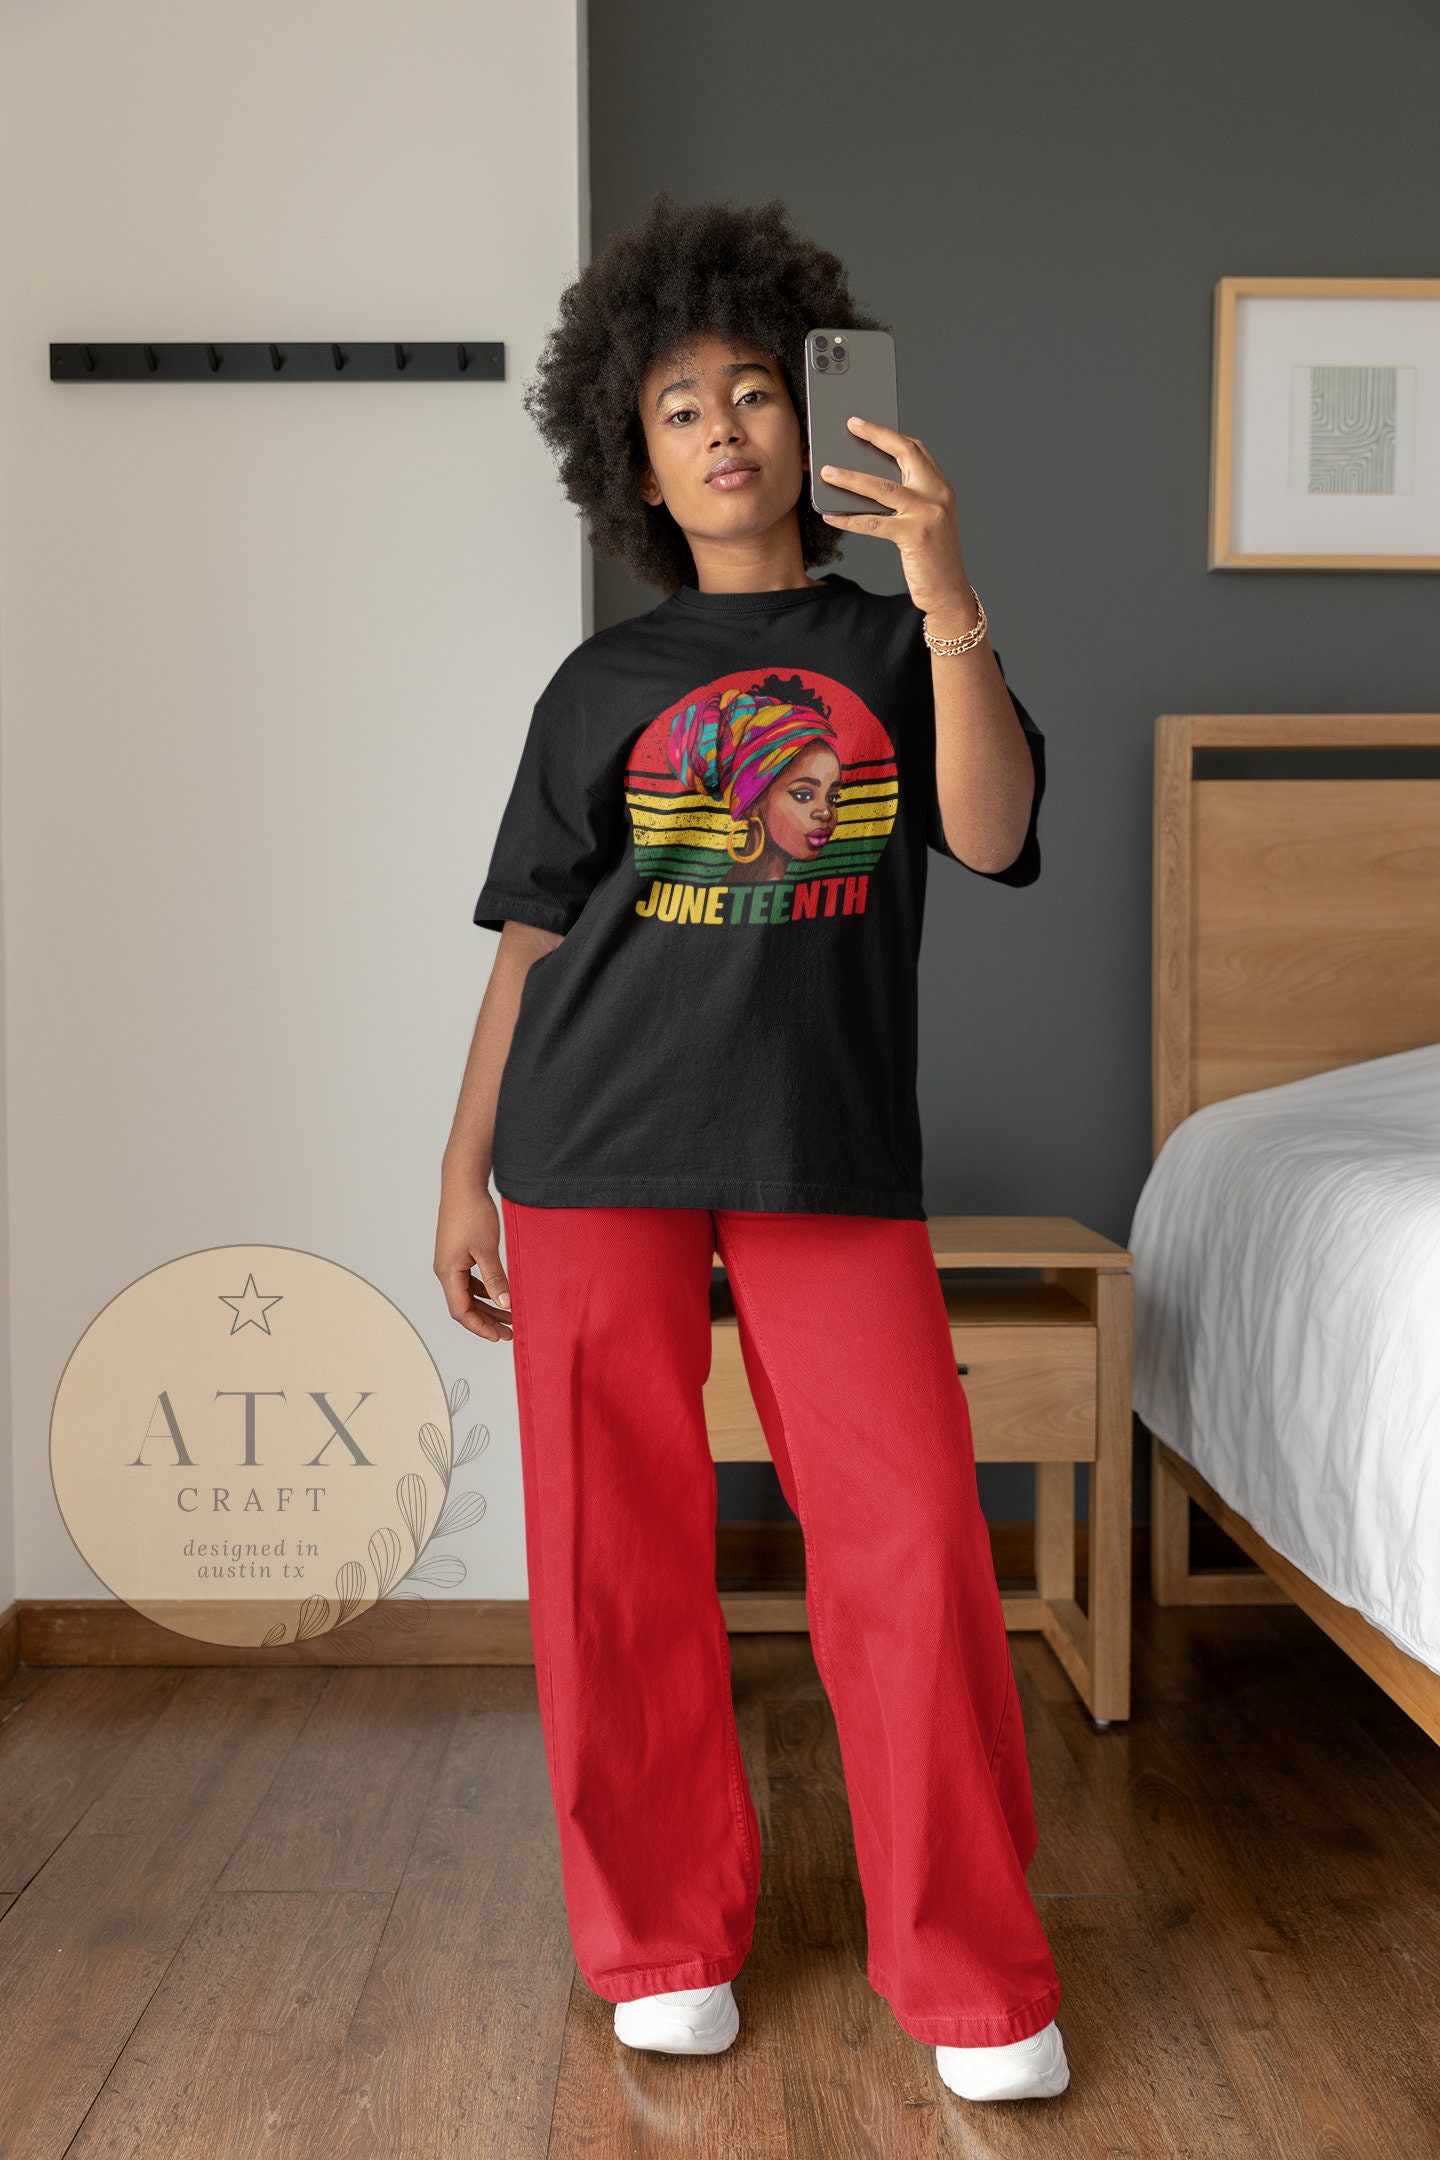 Women's Black History Shirt Built by Africa T Shirt Juneteenth Tee African American Slavery 1865 Emancipation Day Tshirt Ladies Woman Vintage Red / 2x